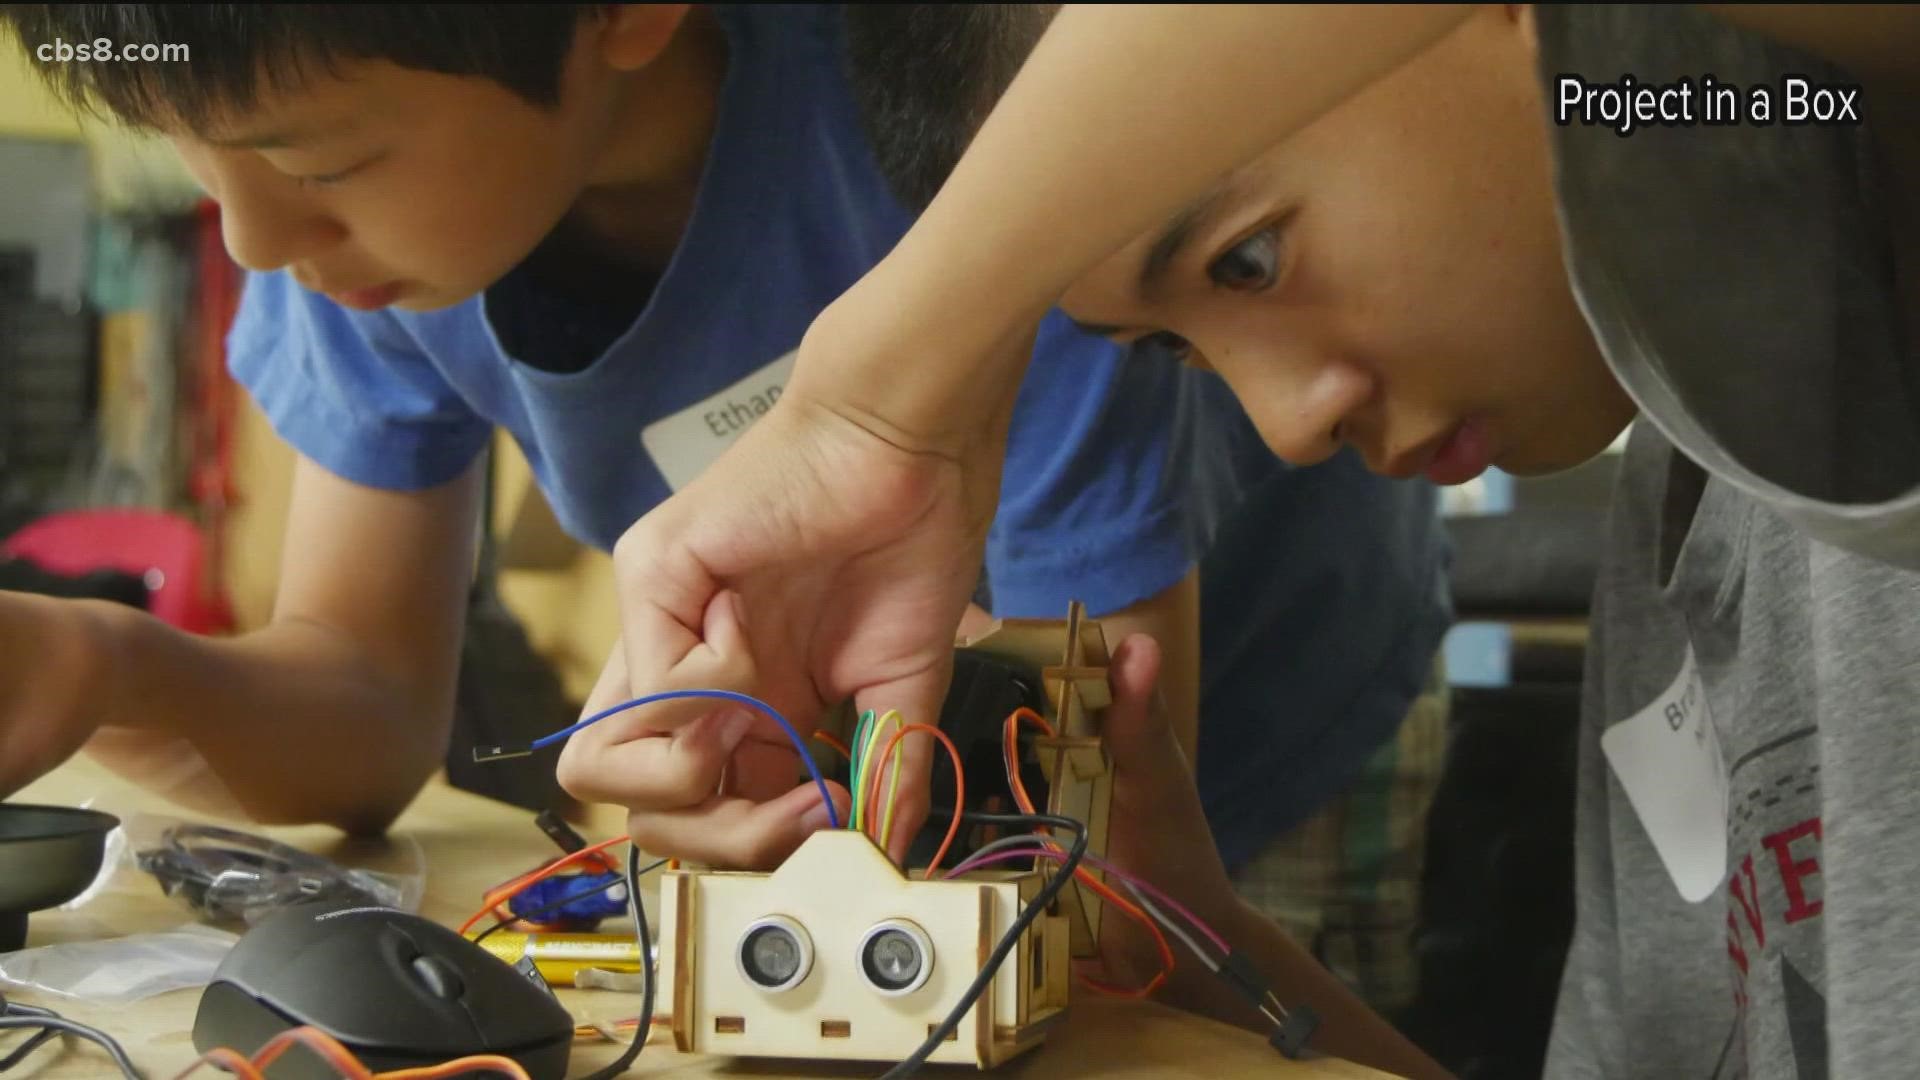 A free program from the San Diego Library and UCSD are putting kid's engineering skills to the test.